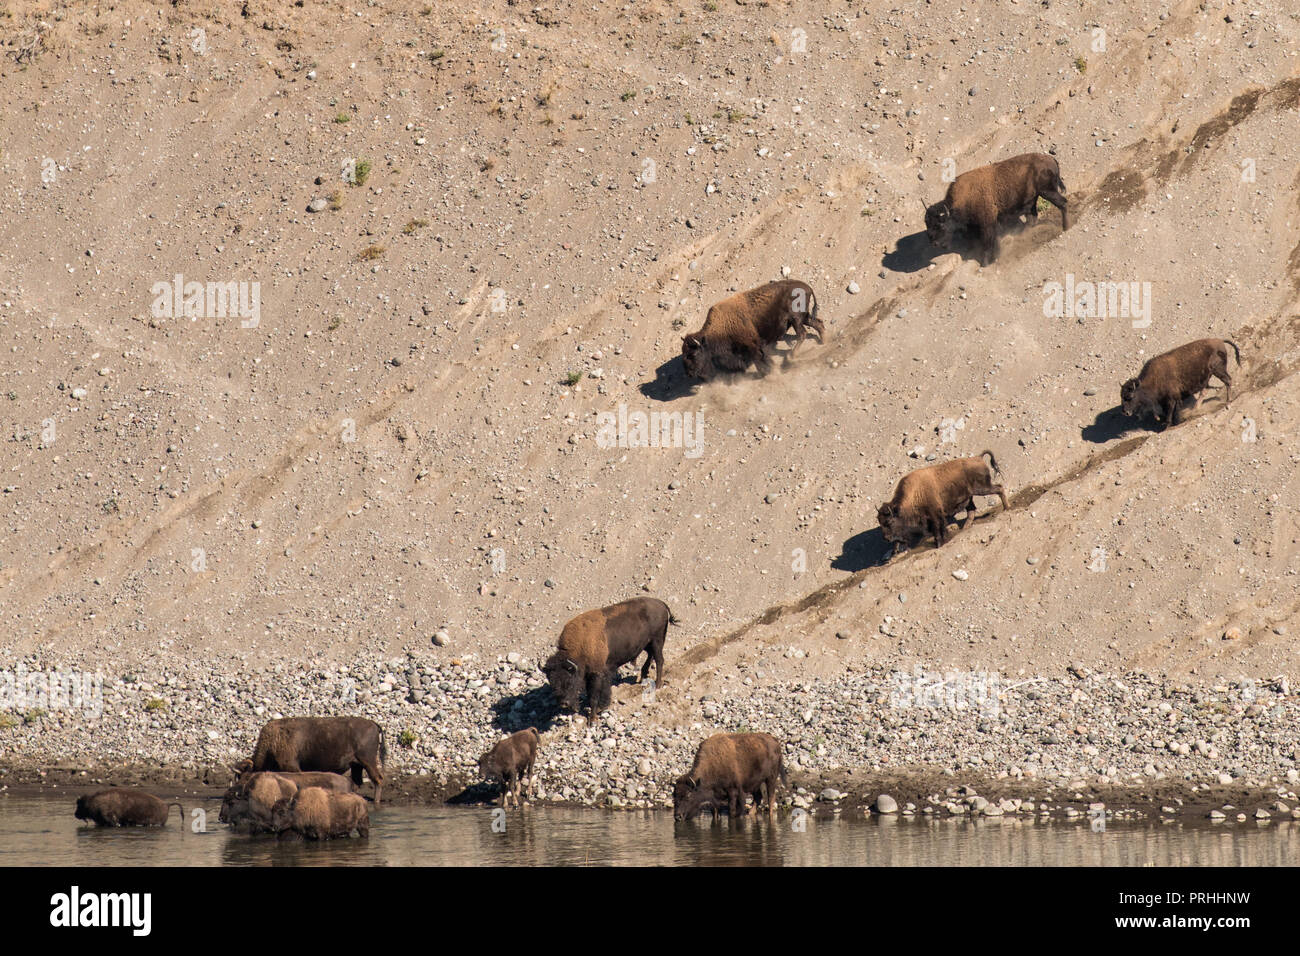 Bison running down a steep river bank along the Lamar river in Yellowstone National Park Stock Photo